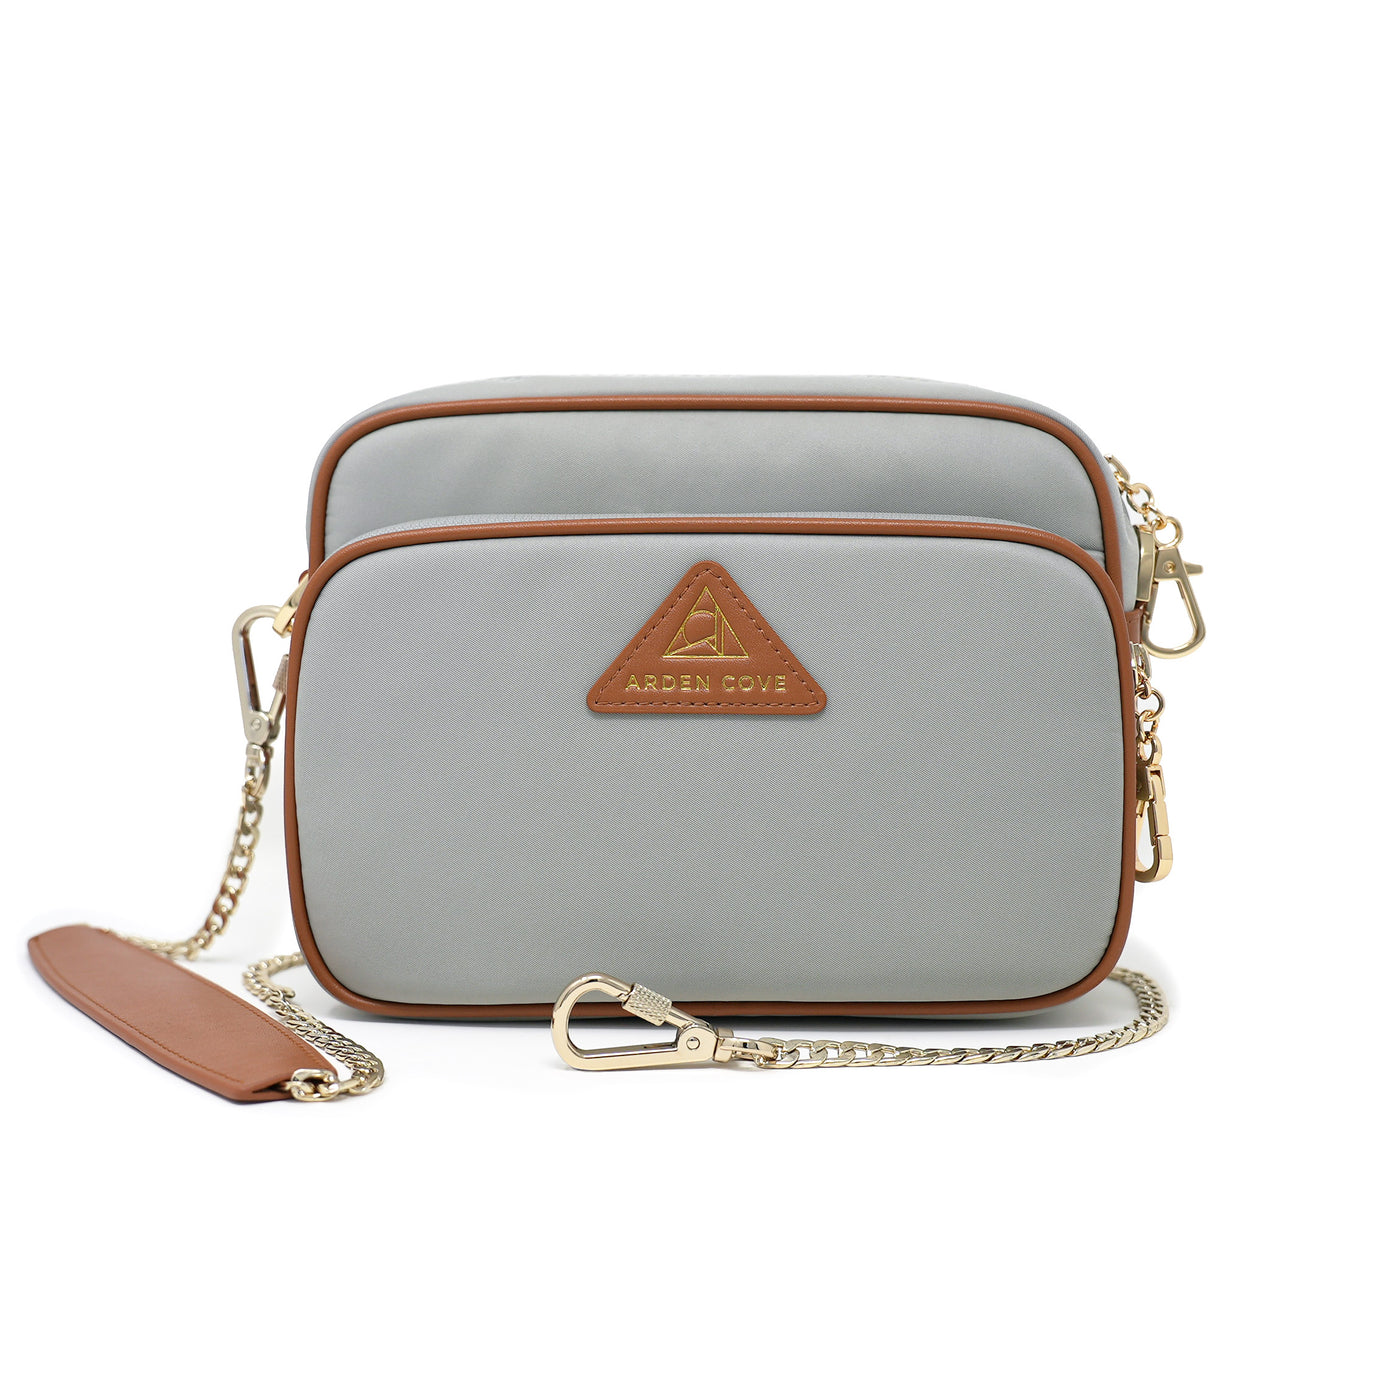 Anti-theft Water-resistant Travel Crossbody - Crissy Full Crossbody in Light Grey Gold with slash-resistant chain locking clasps straps - front view - Arden Cove